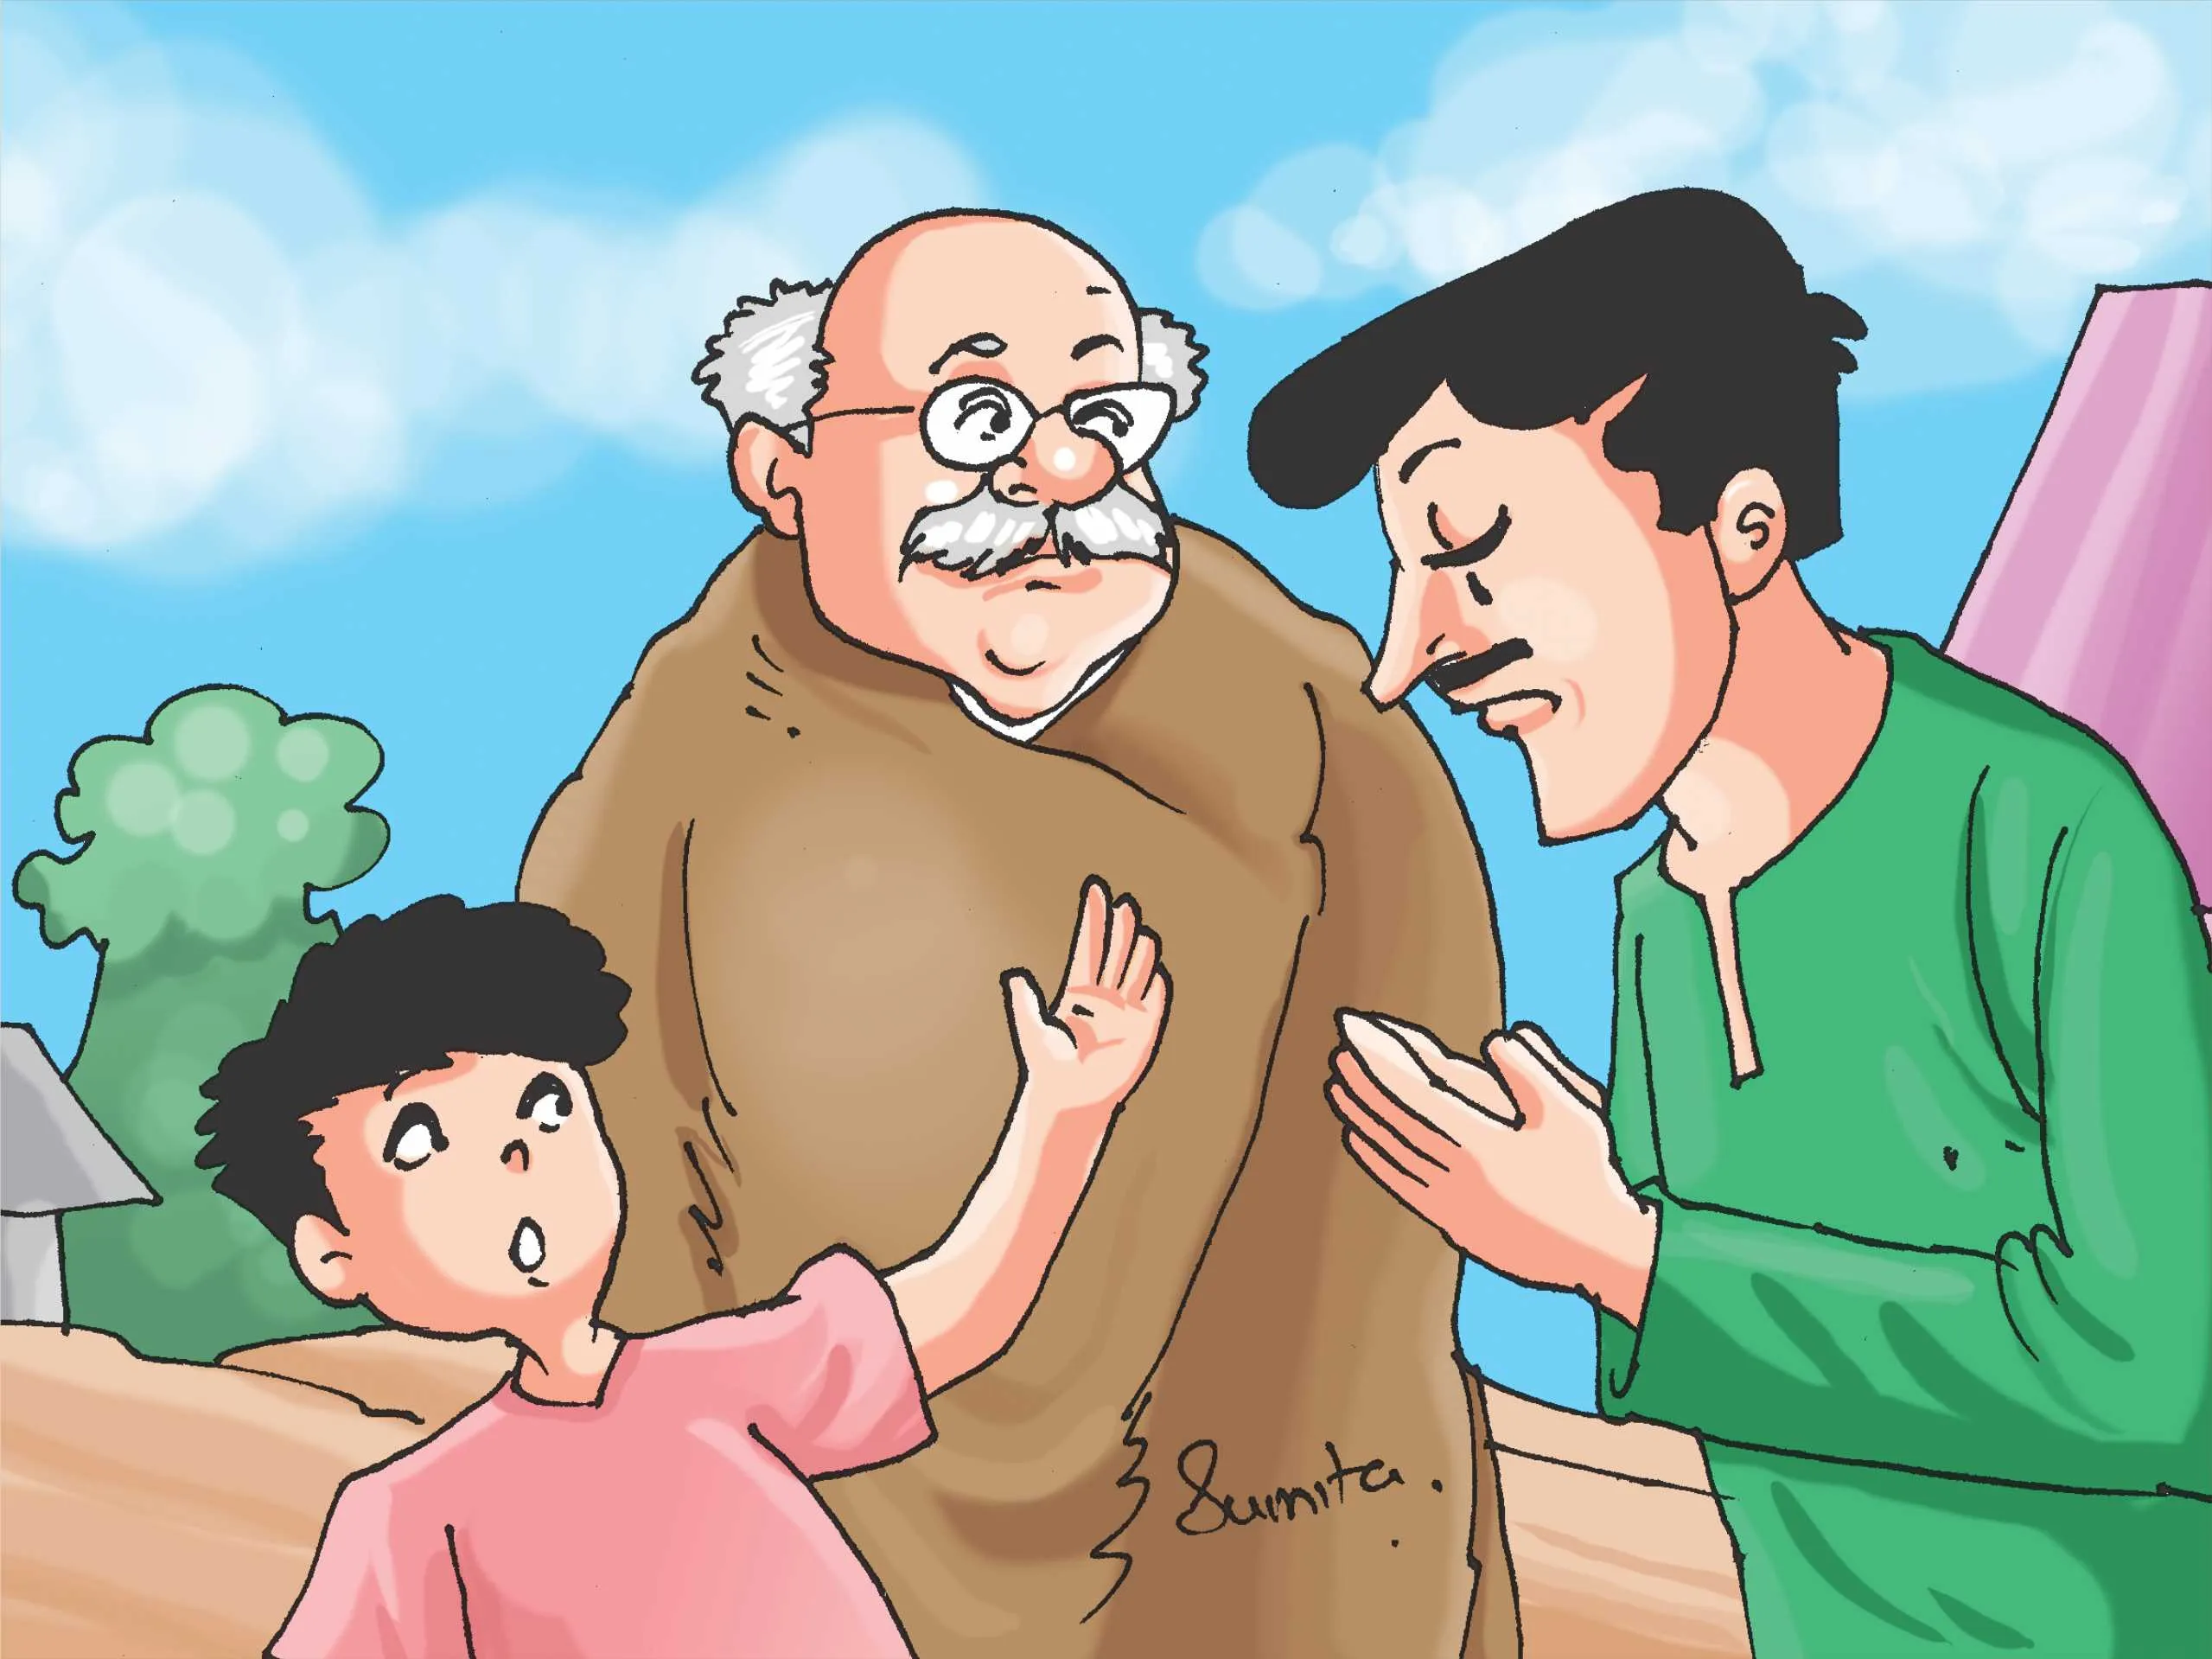 Man with his son and father cartoon  image